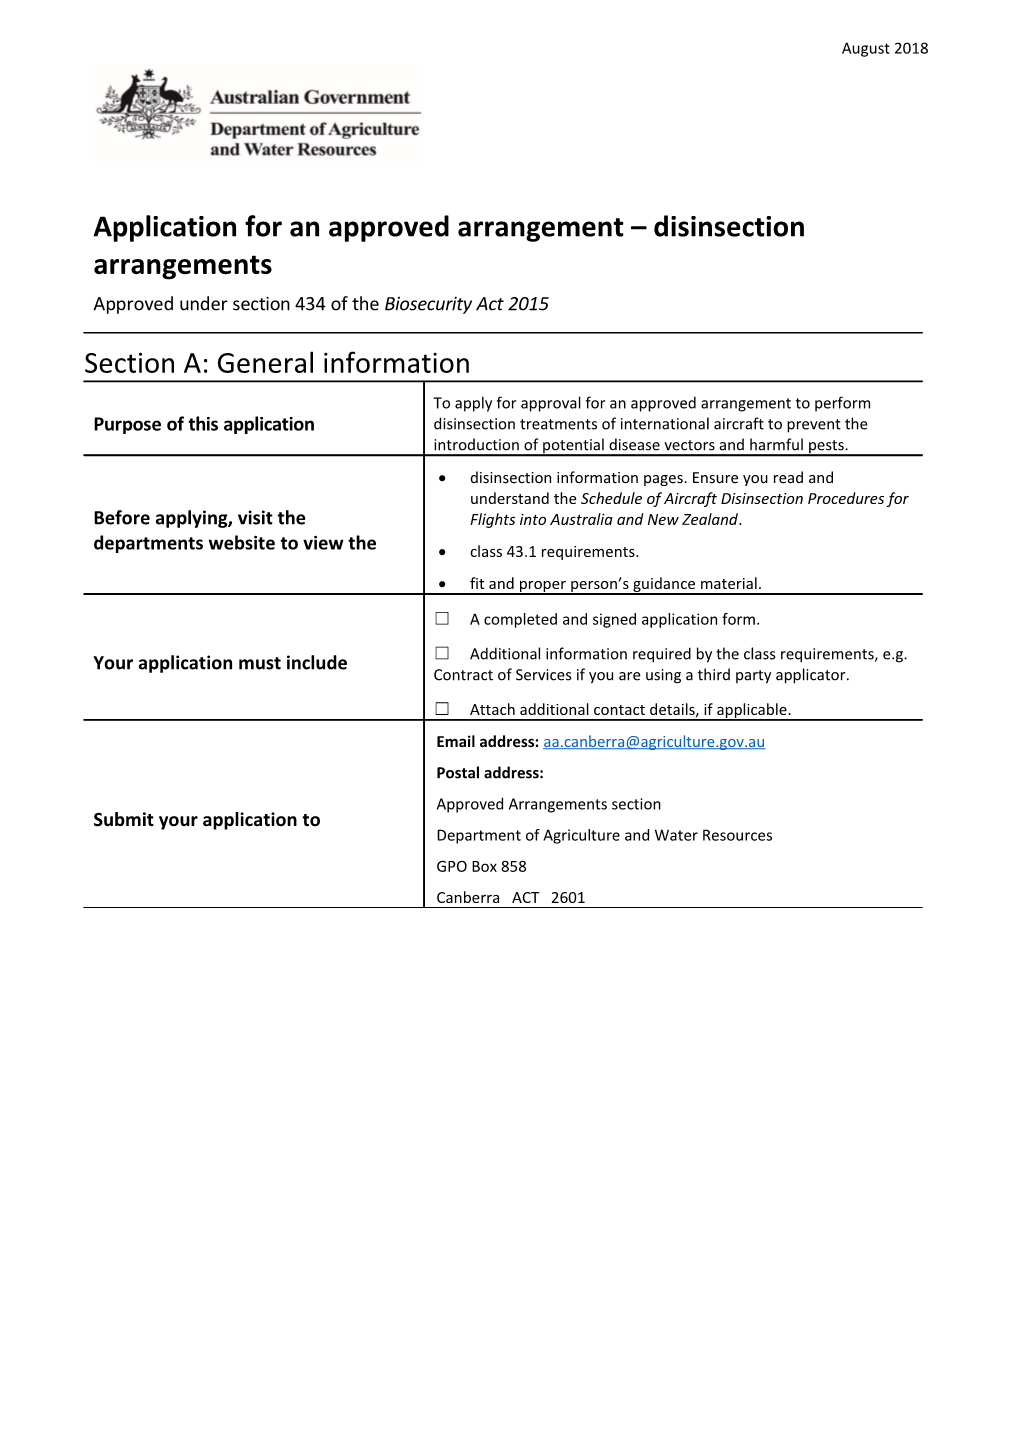 Application for an Approved Arrangement - Disinsection